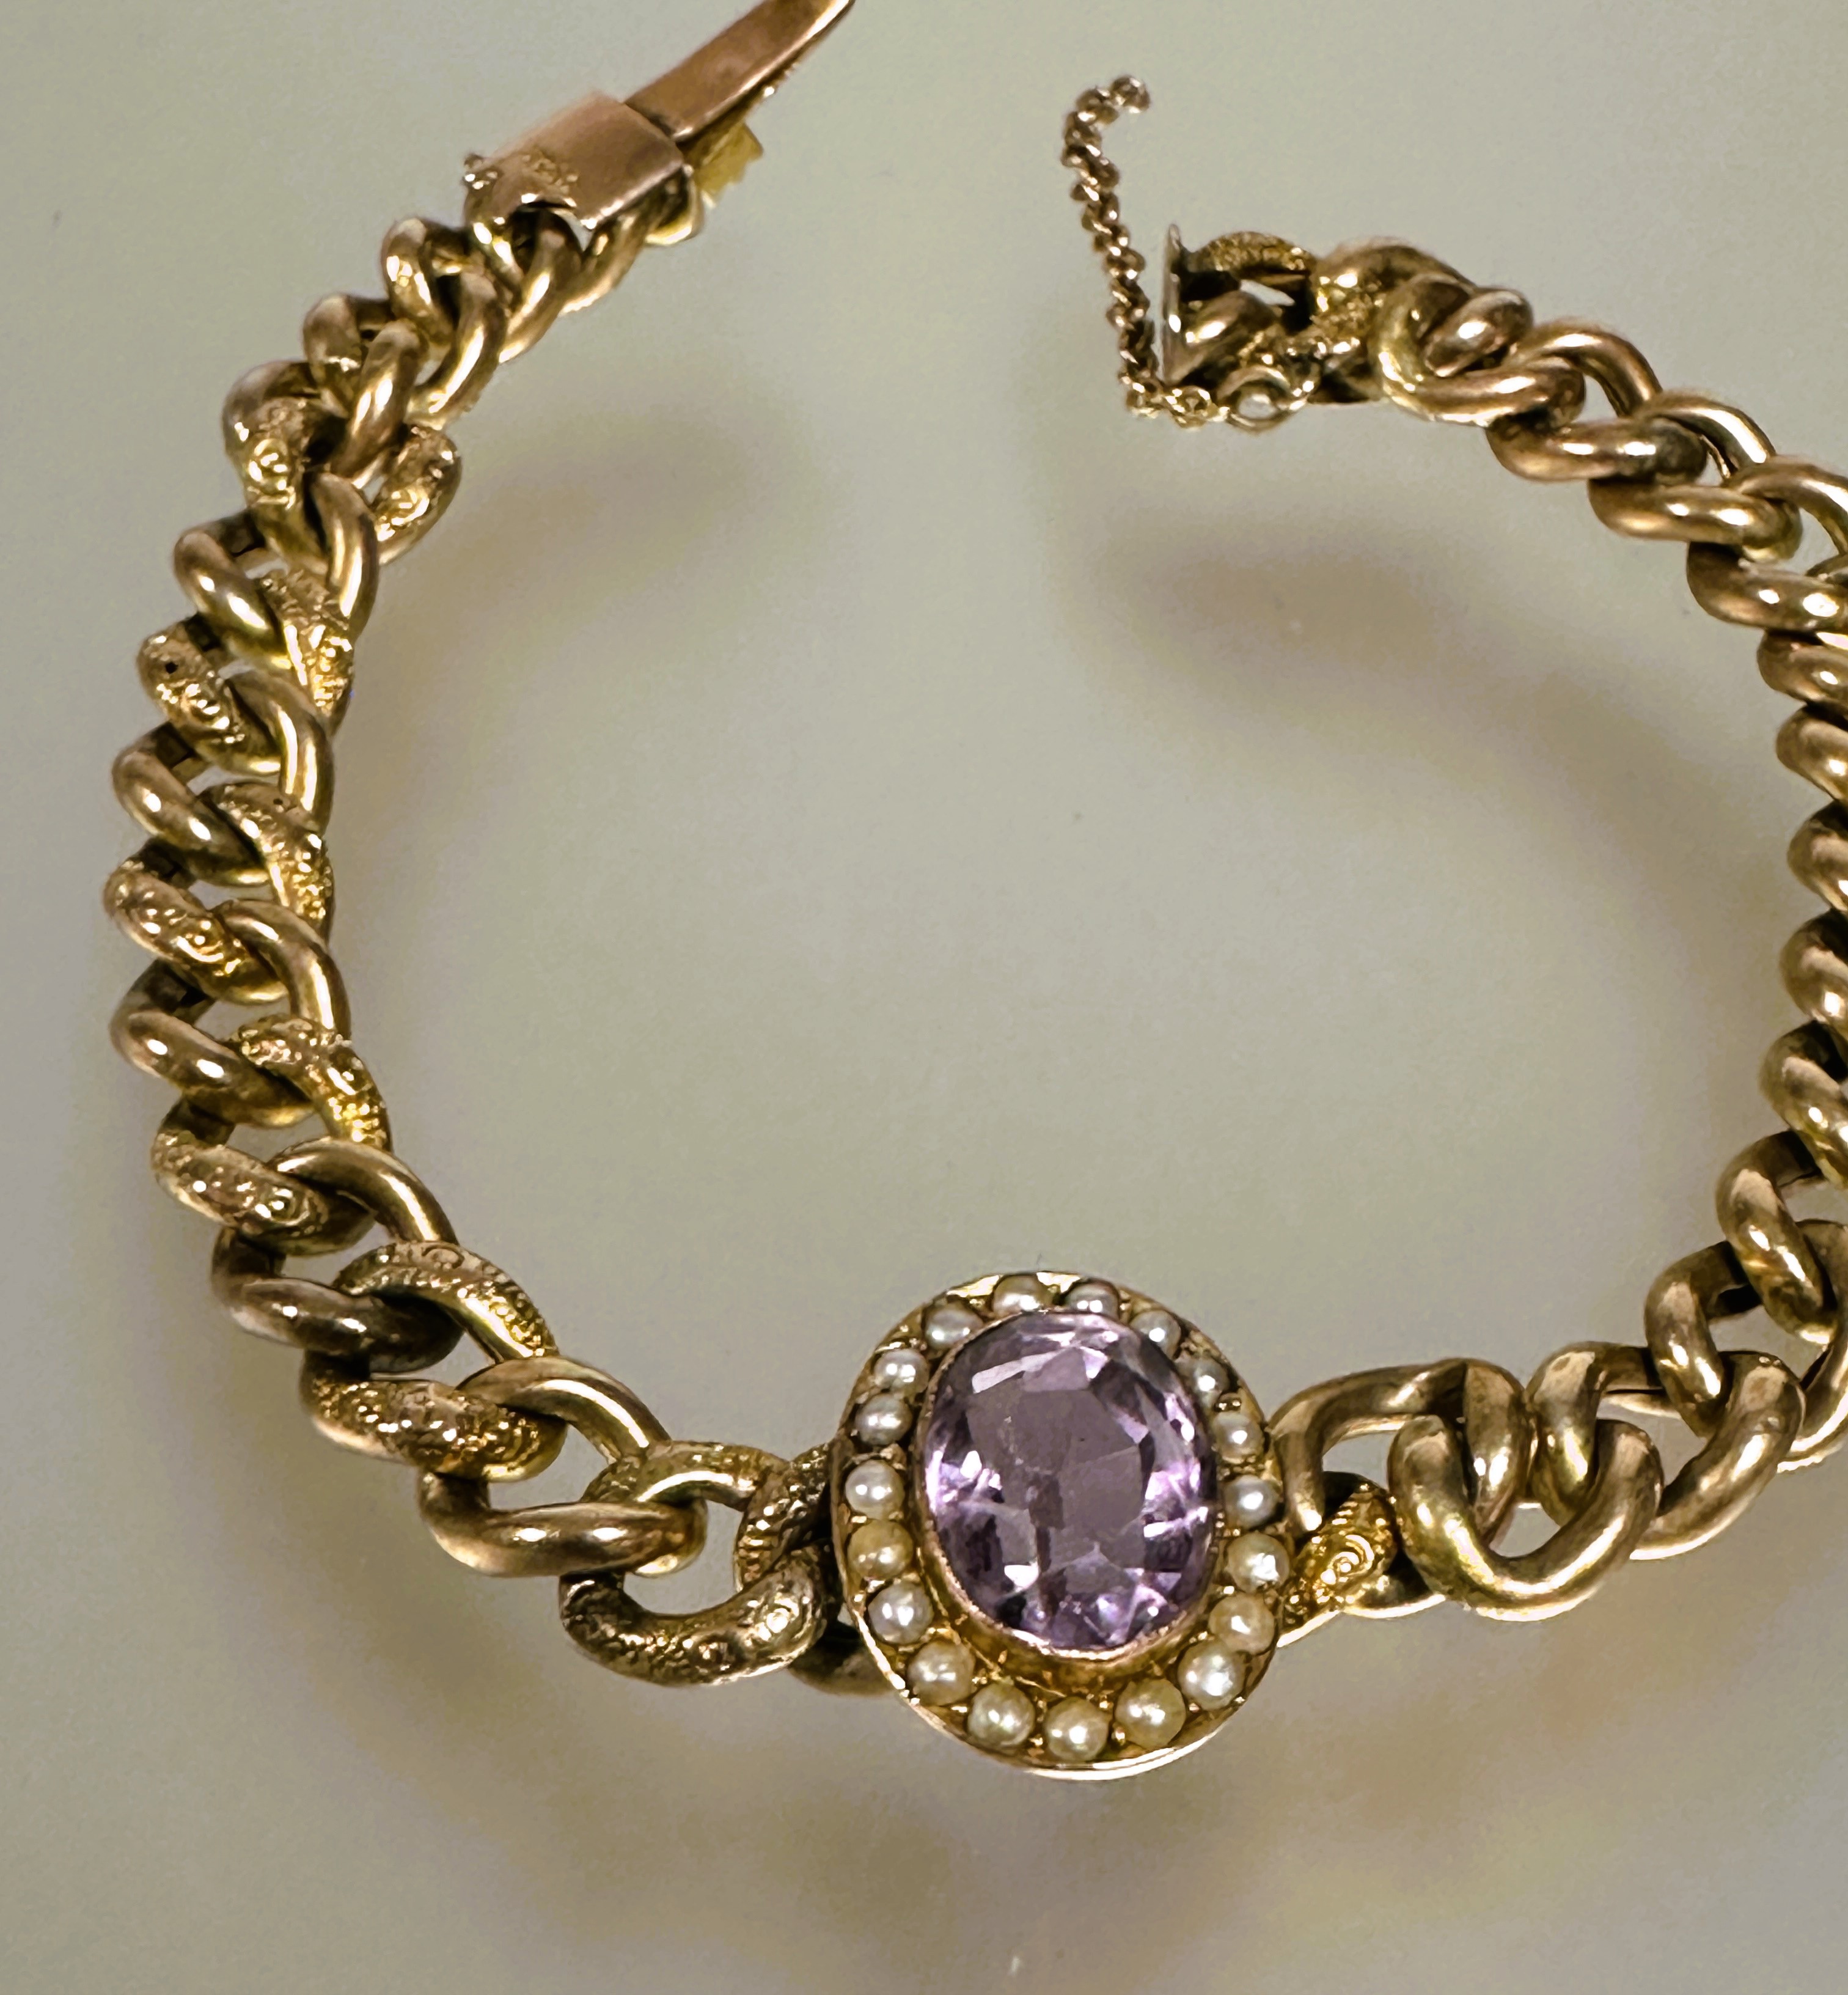 A late 19thc 9ct gold engraved kerb link chain bracelet with clasp fastening and safety chain - Image 4 of 5